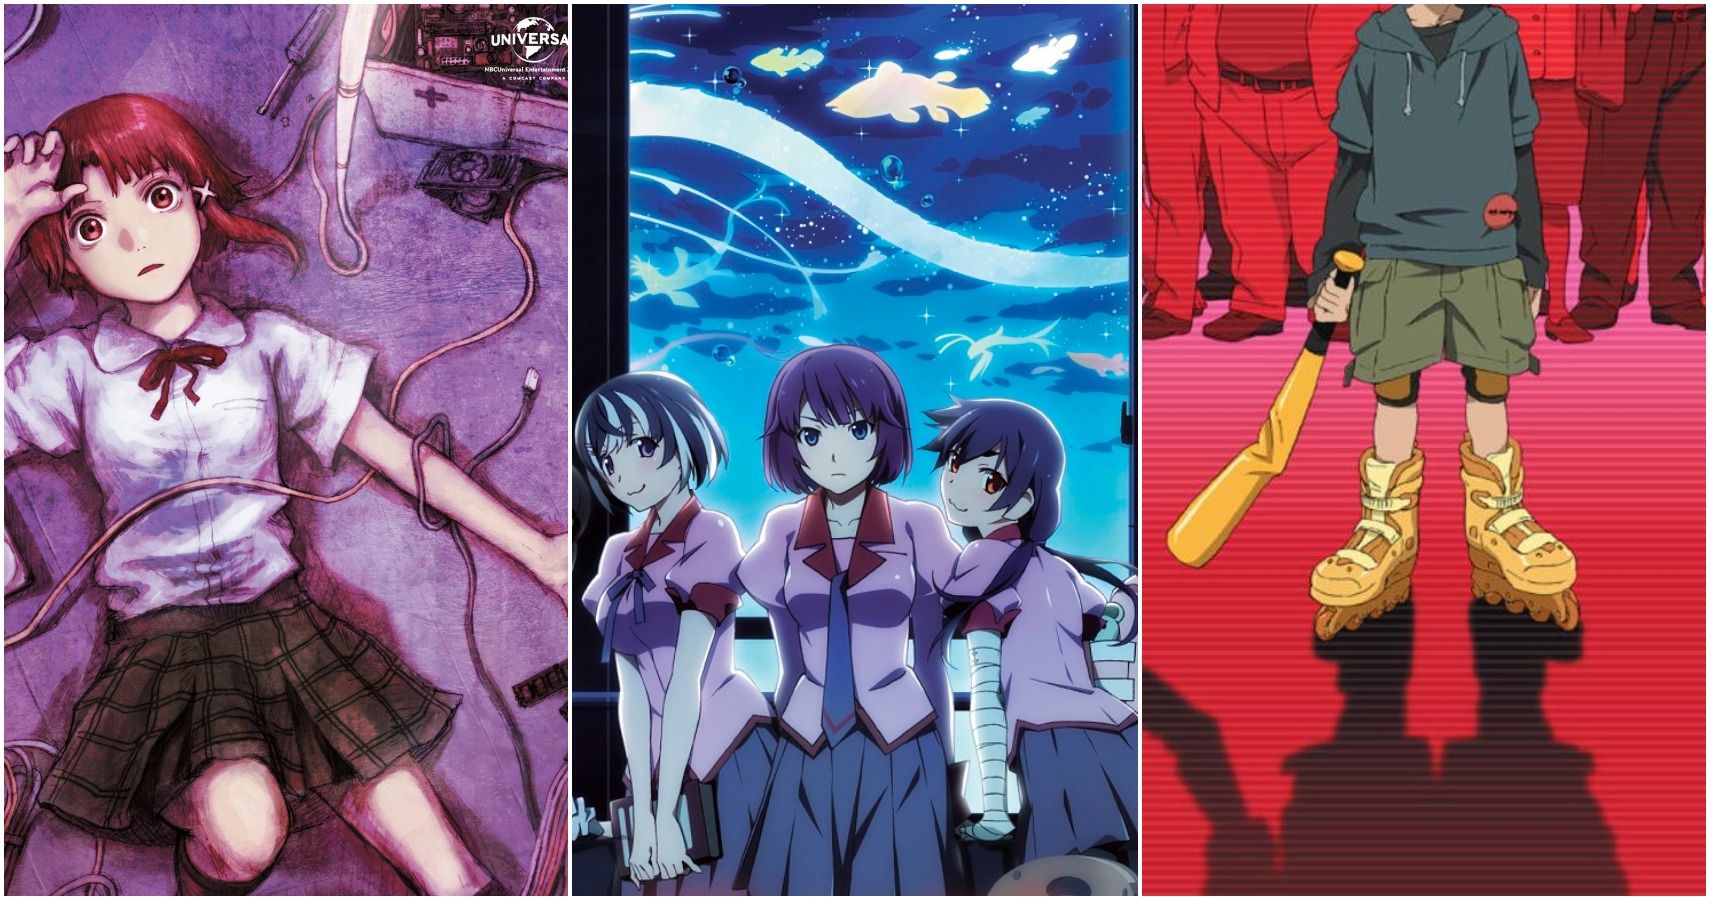 Anime with a similar way of storytelling to the Monogatari series